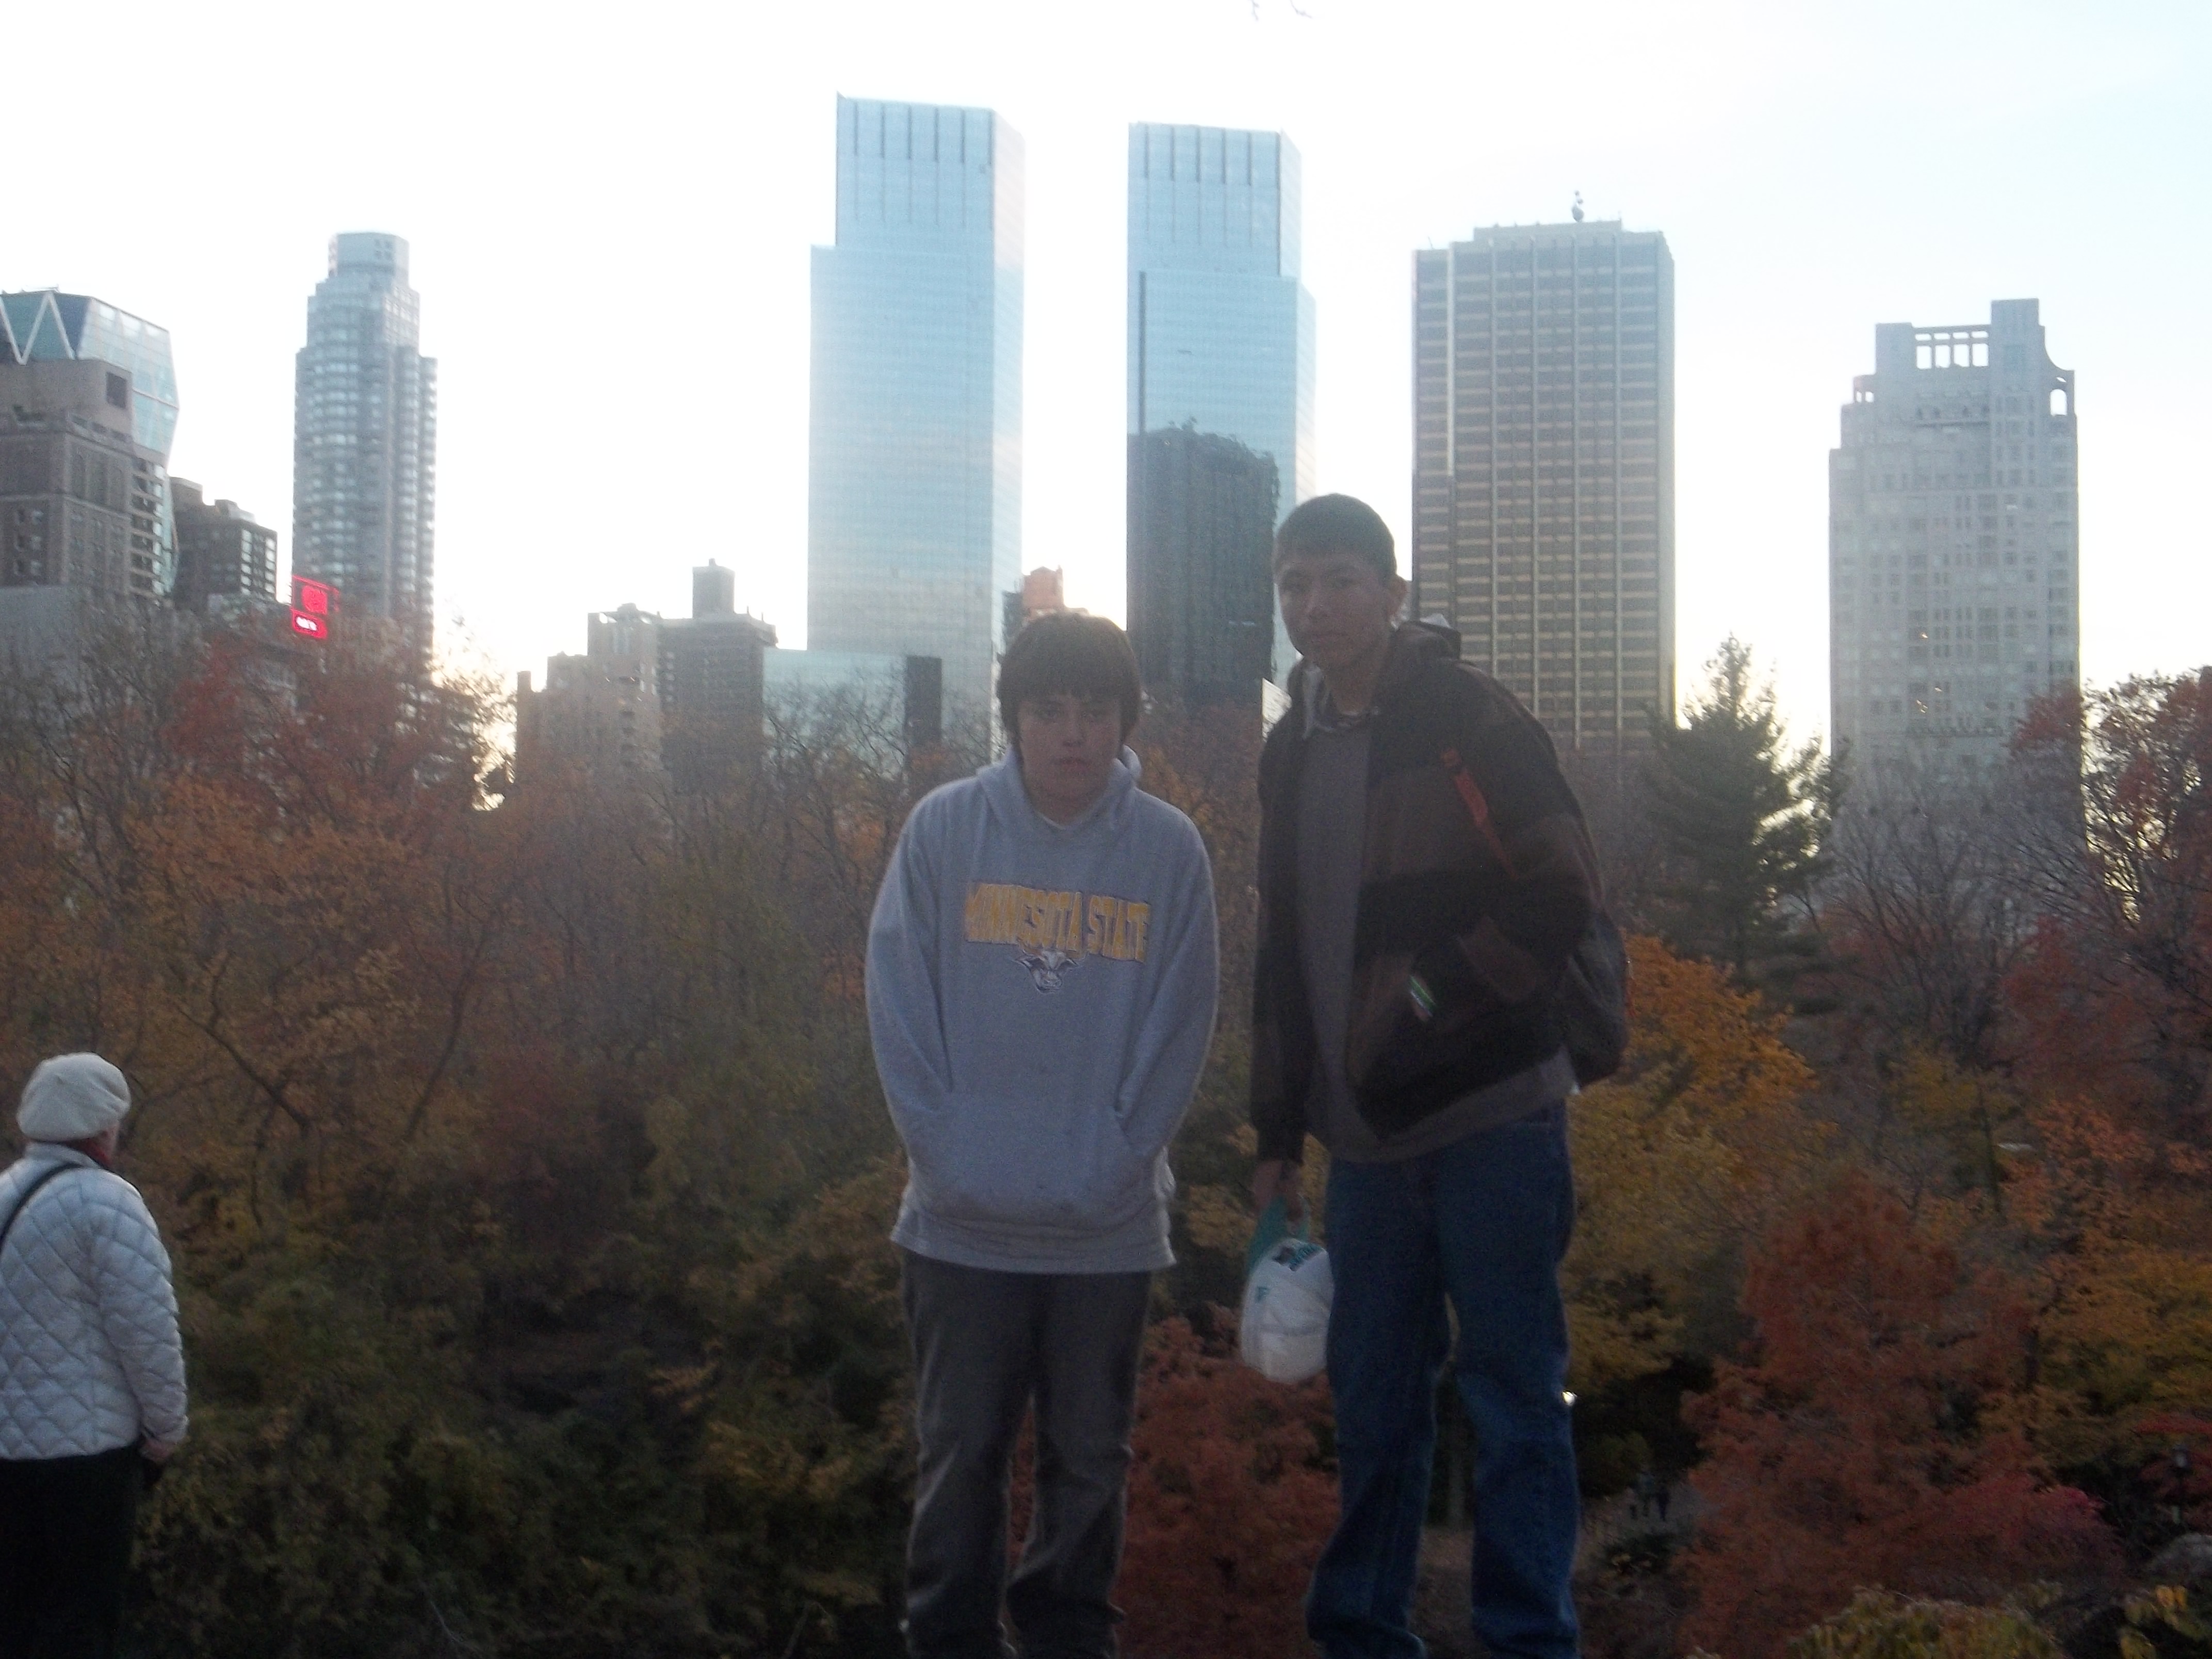 Quick stop in Central Park for several pictures!